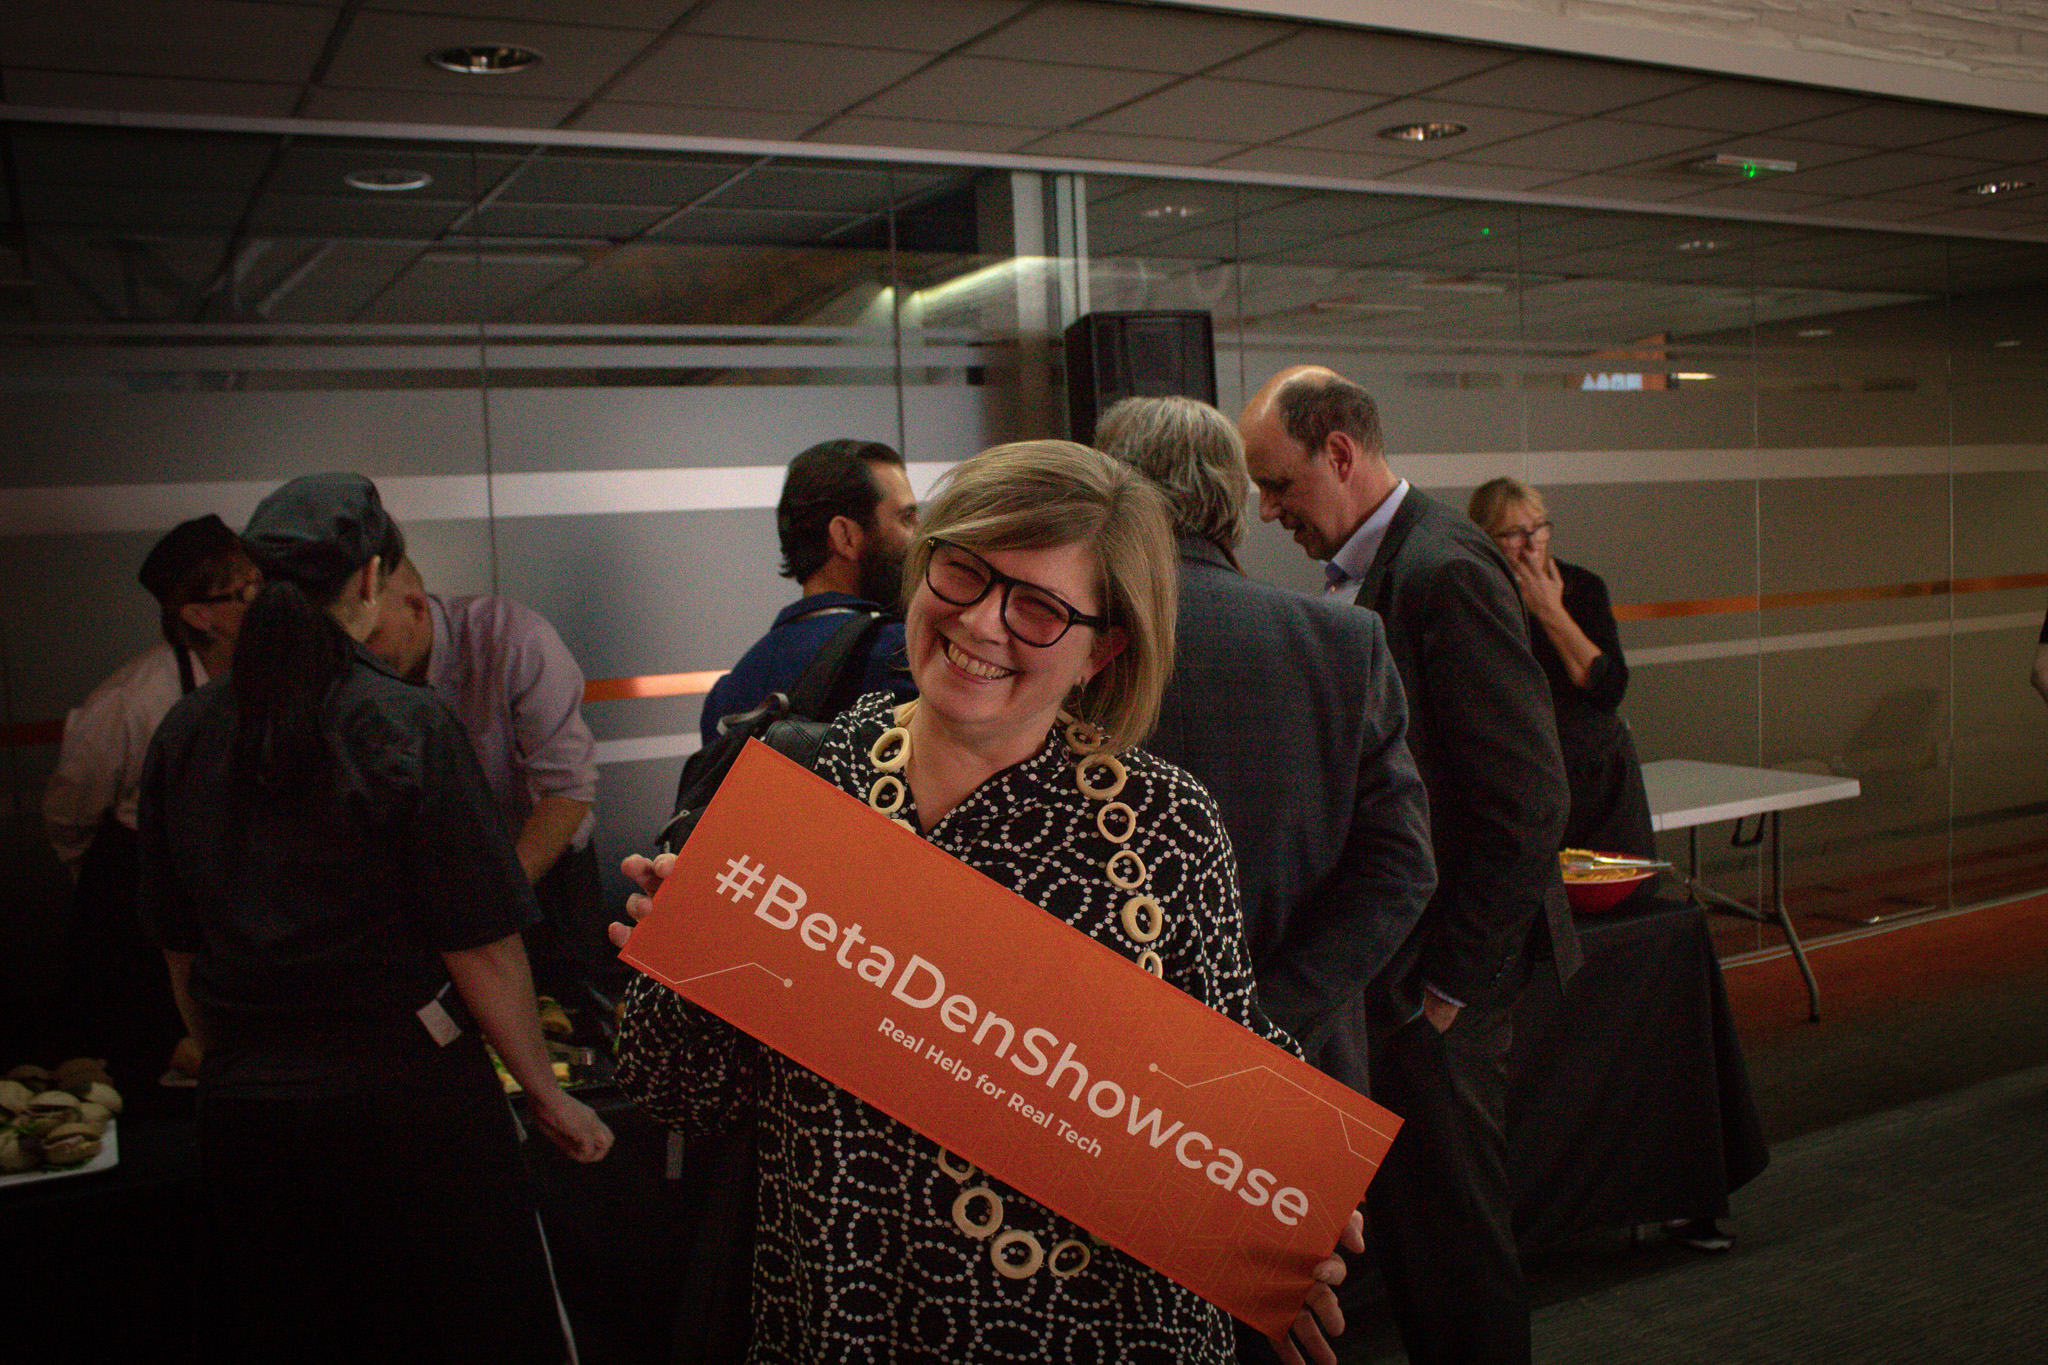 Jenny Rhode from PLINX holding up the #BetaDenShowcase sign